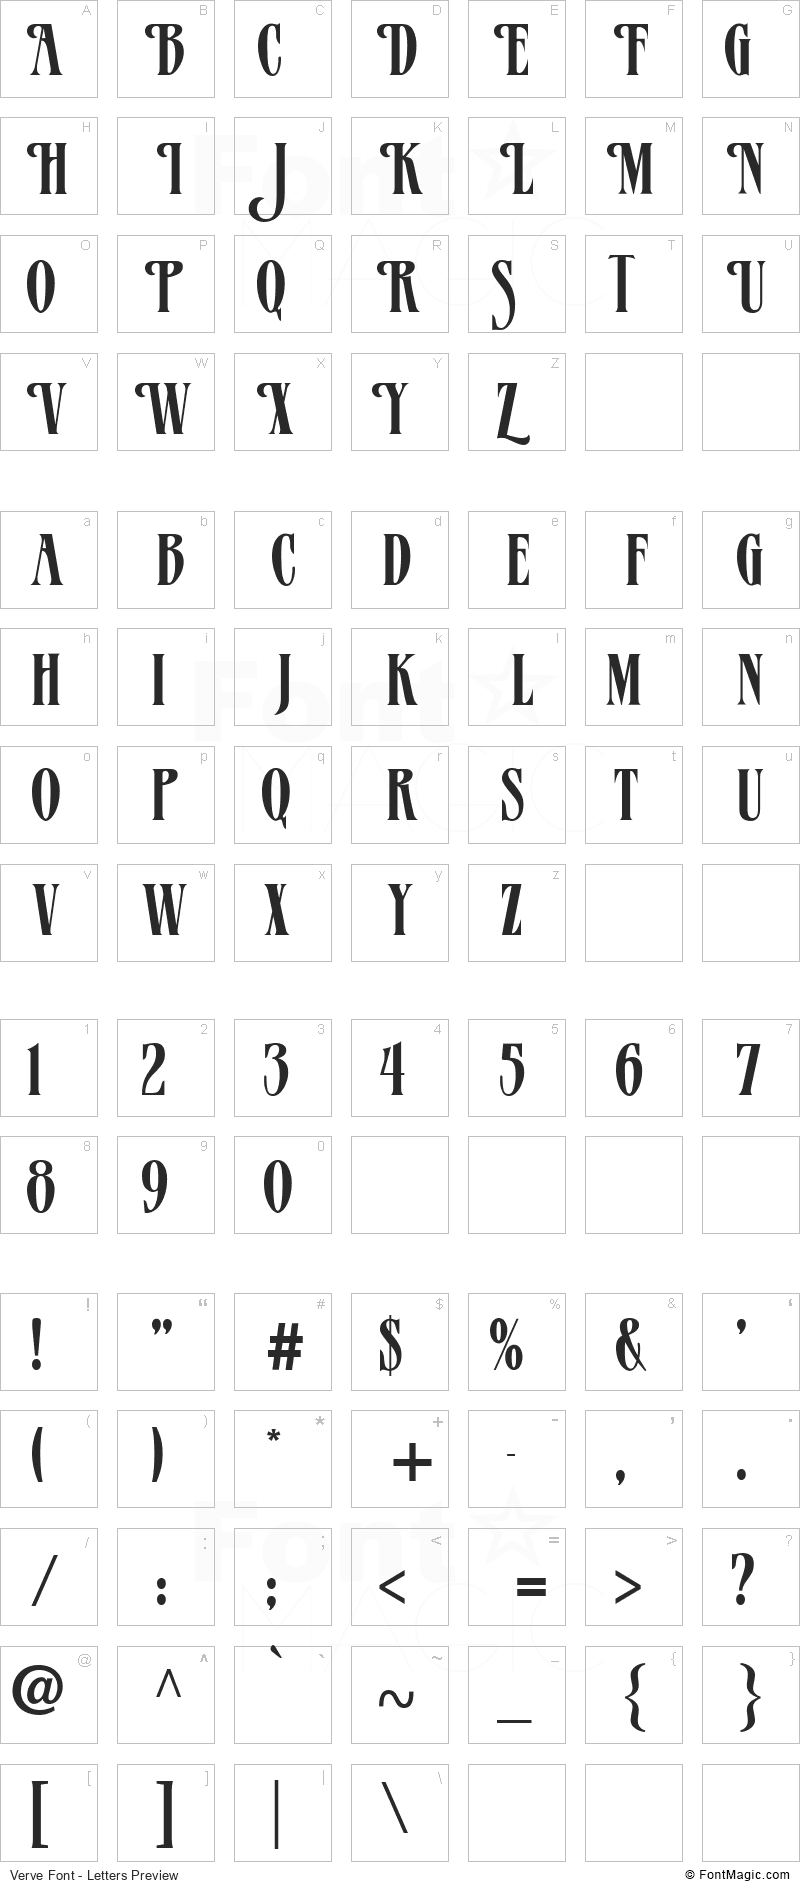 Verve Font - All Latters Preview Chart